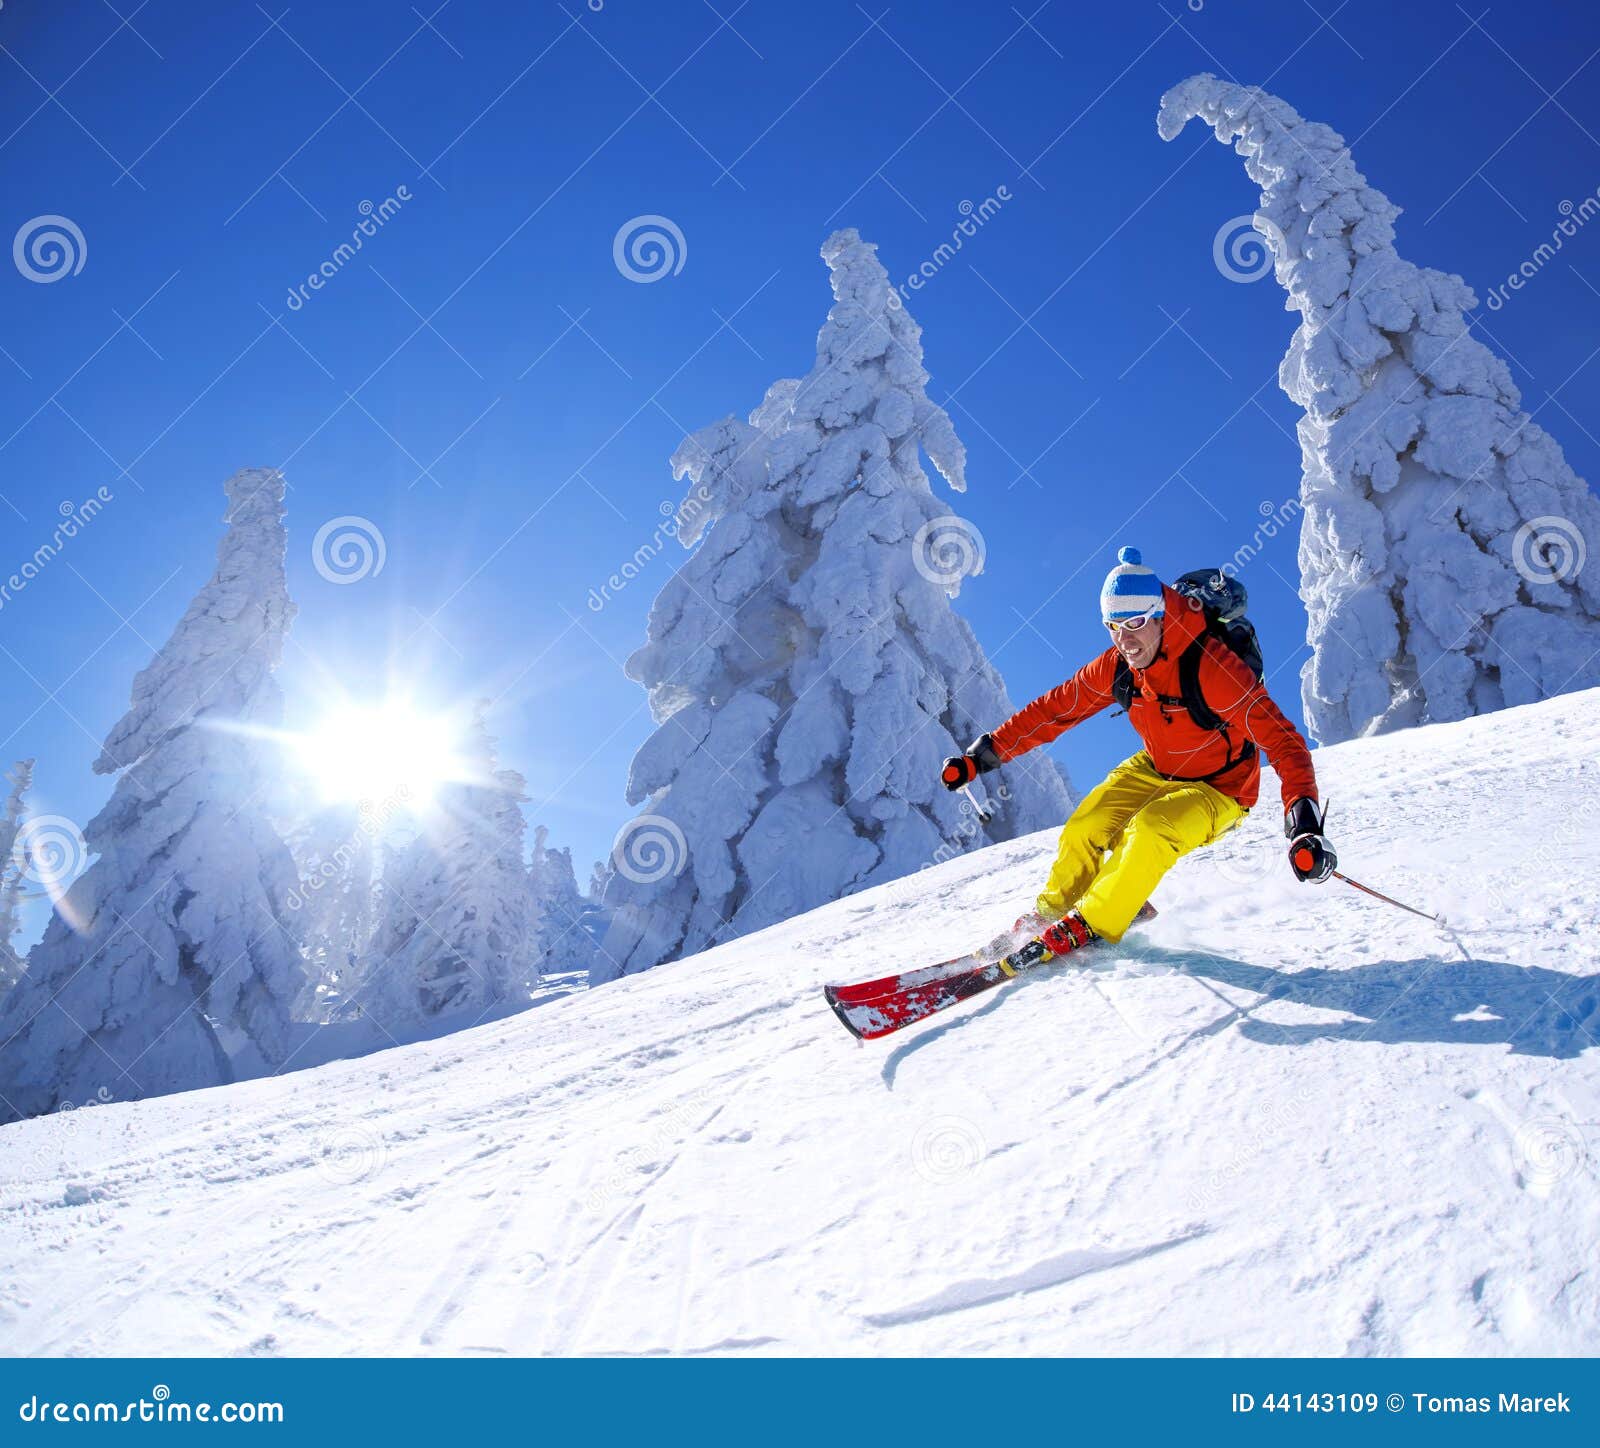 skier skiing downhill in high mountains against sunset